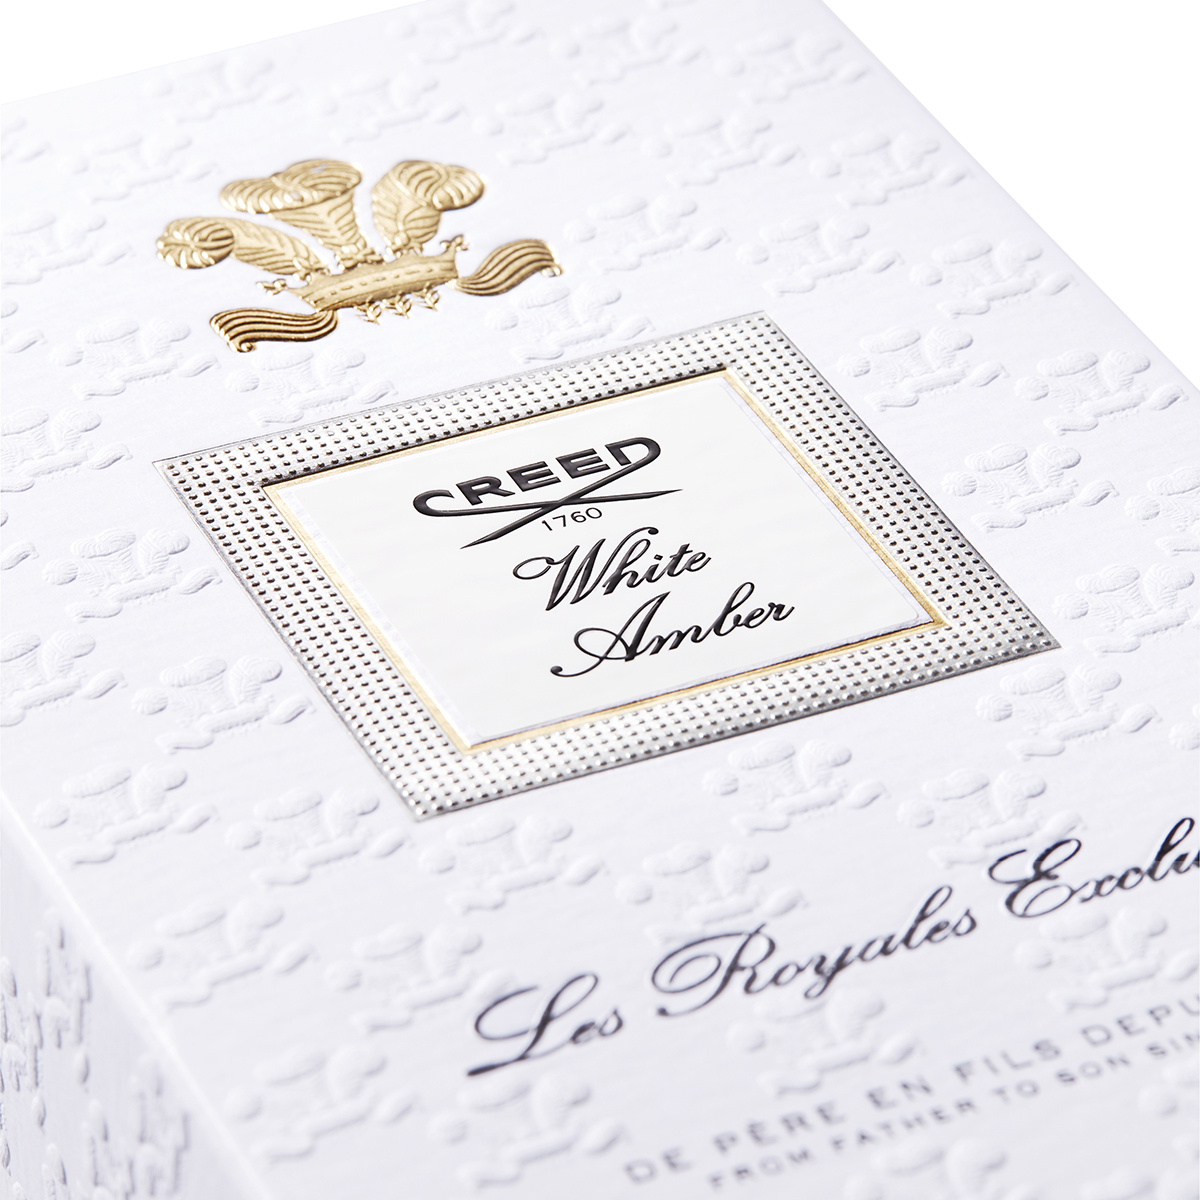 Creed - Royal Exclusives White Amber EDP